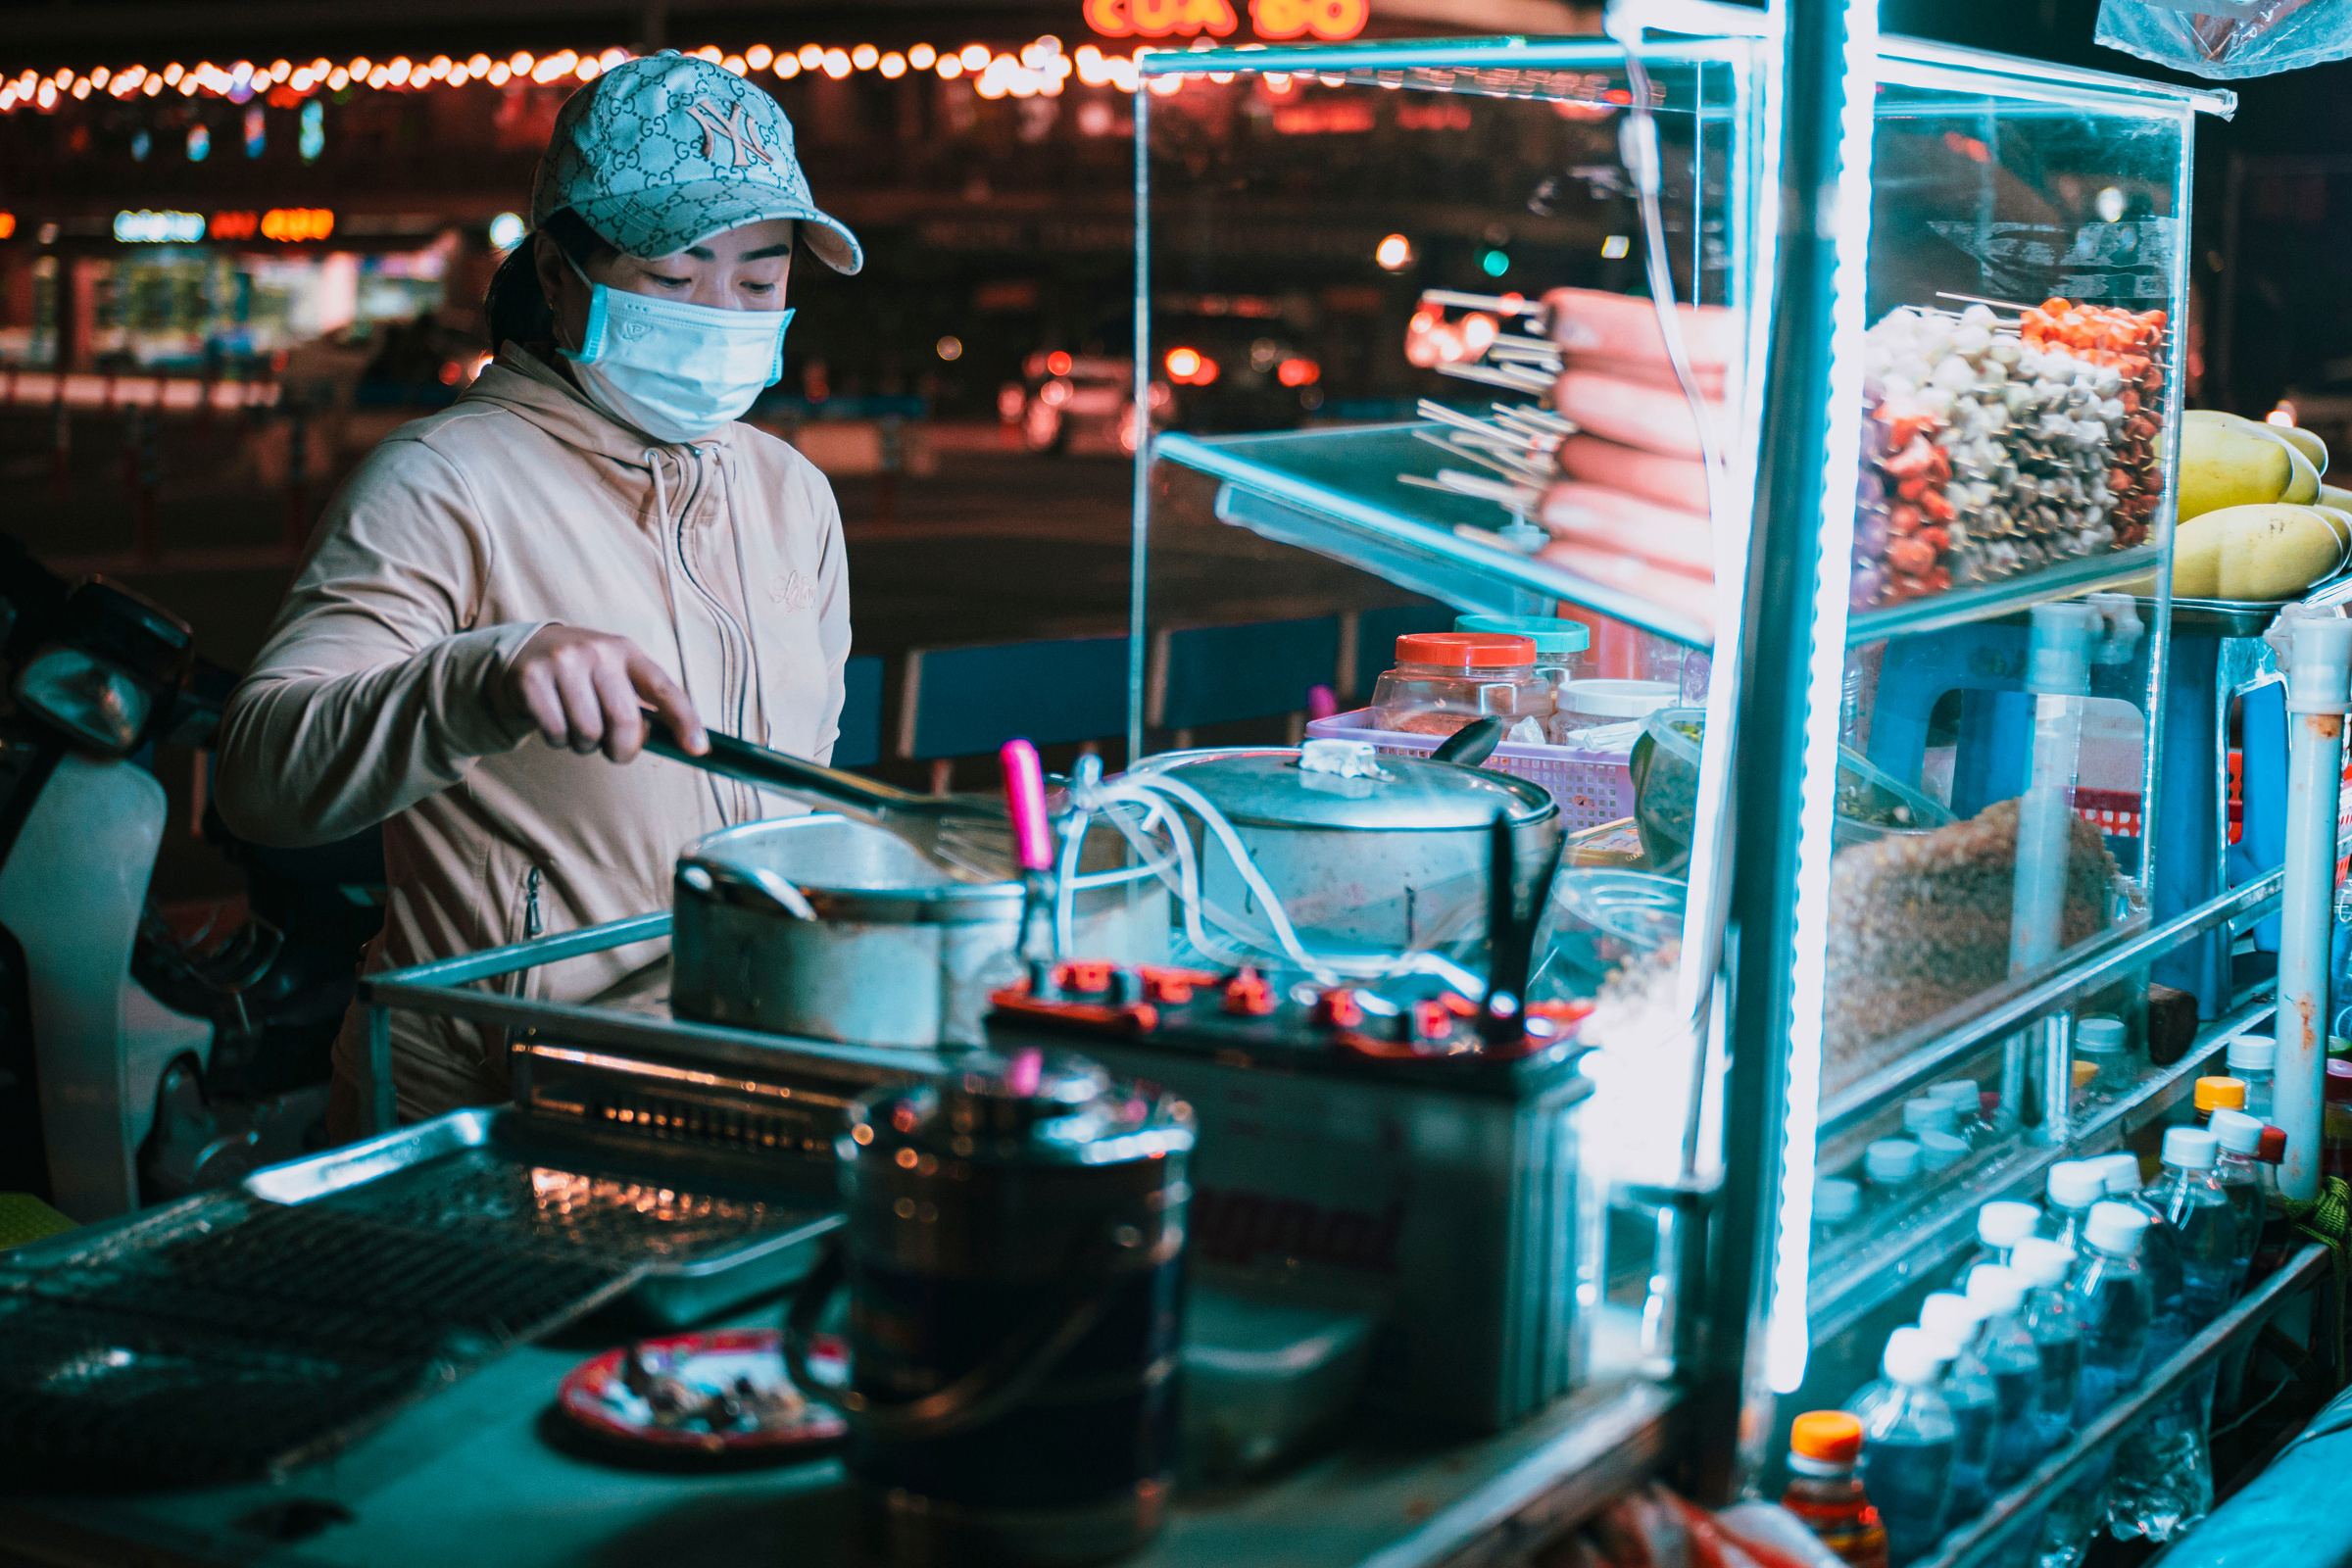 Person Cooking in a Food Stall